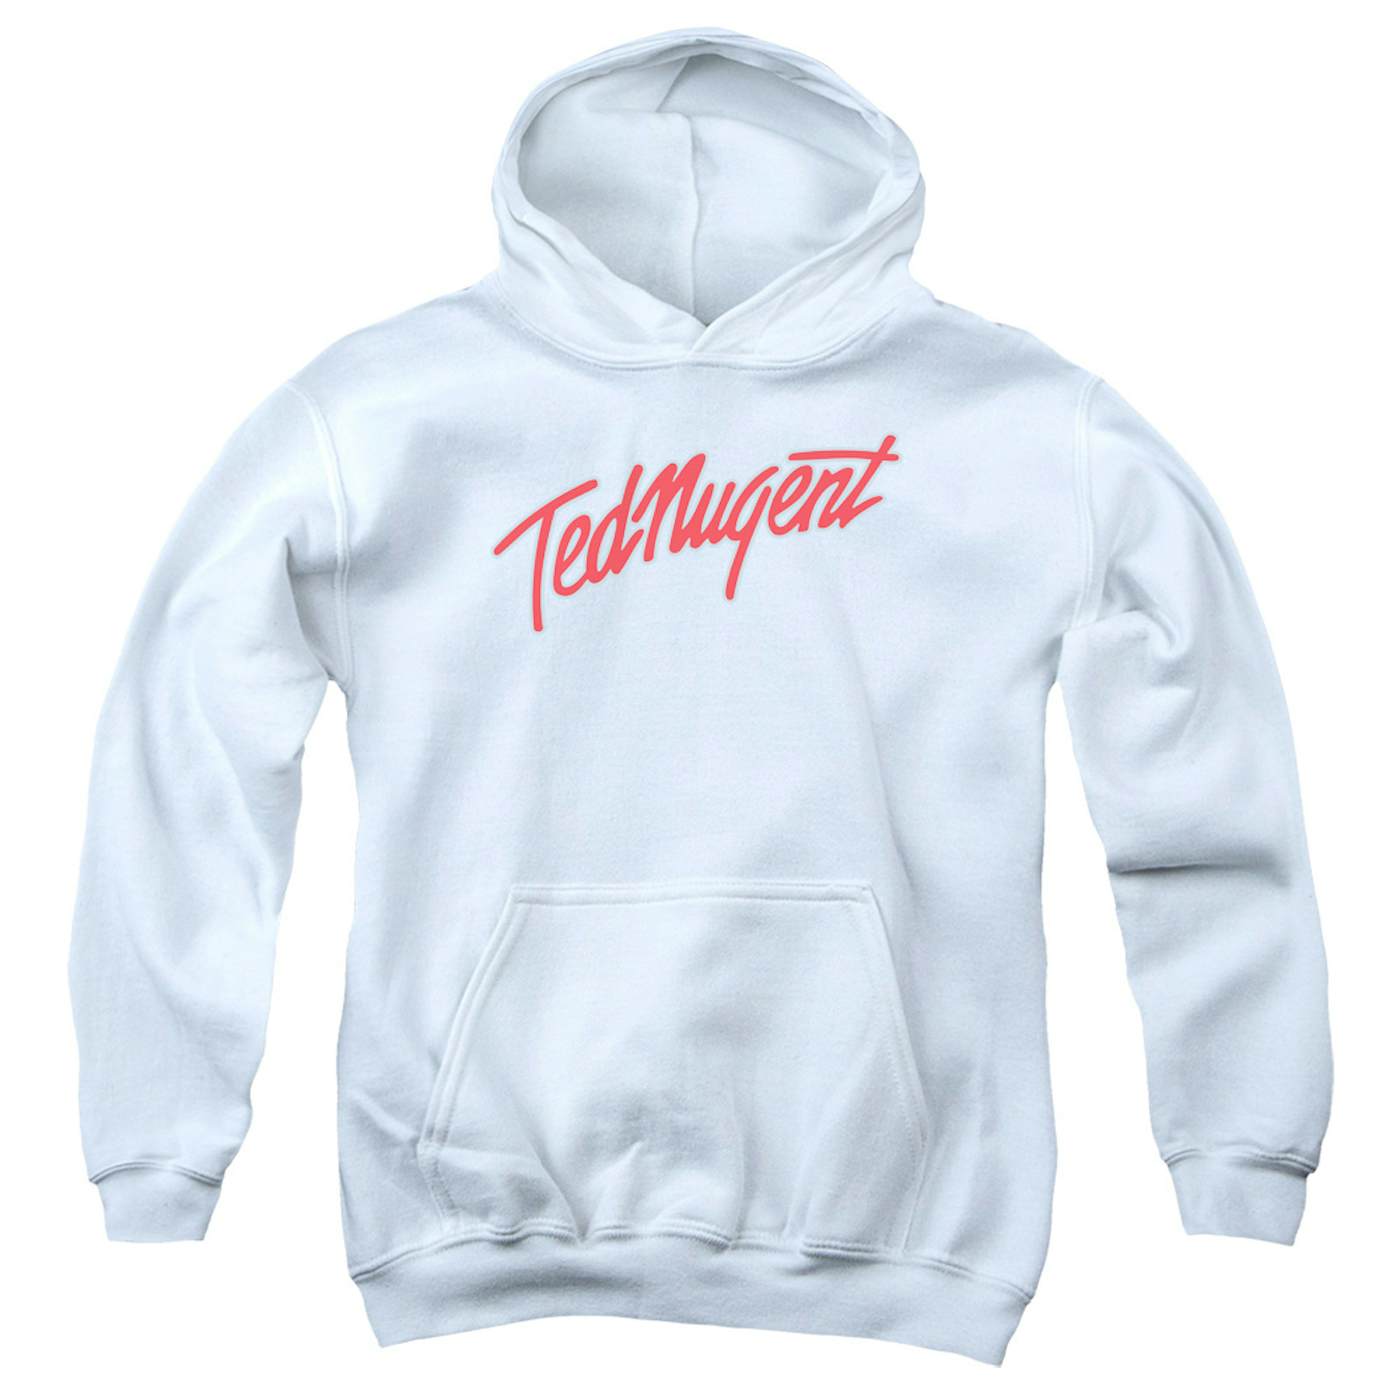 Ted Nugent Youth Hoodie | CLEAN LOGO Pull-Over Sweatshirt